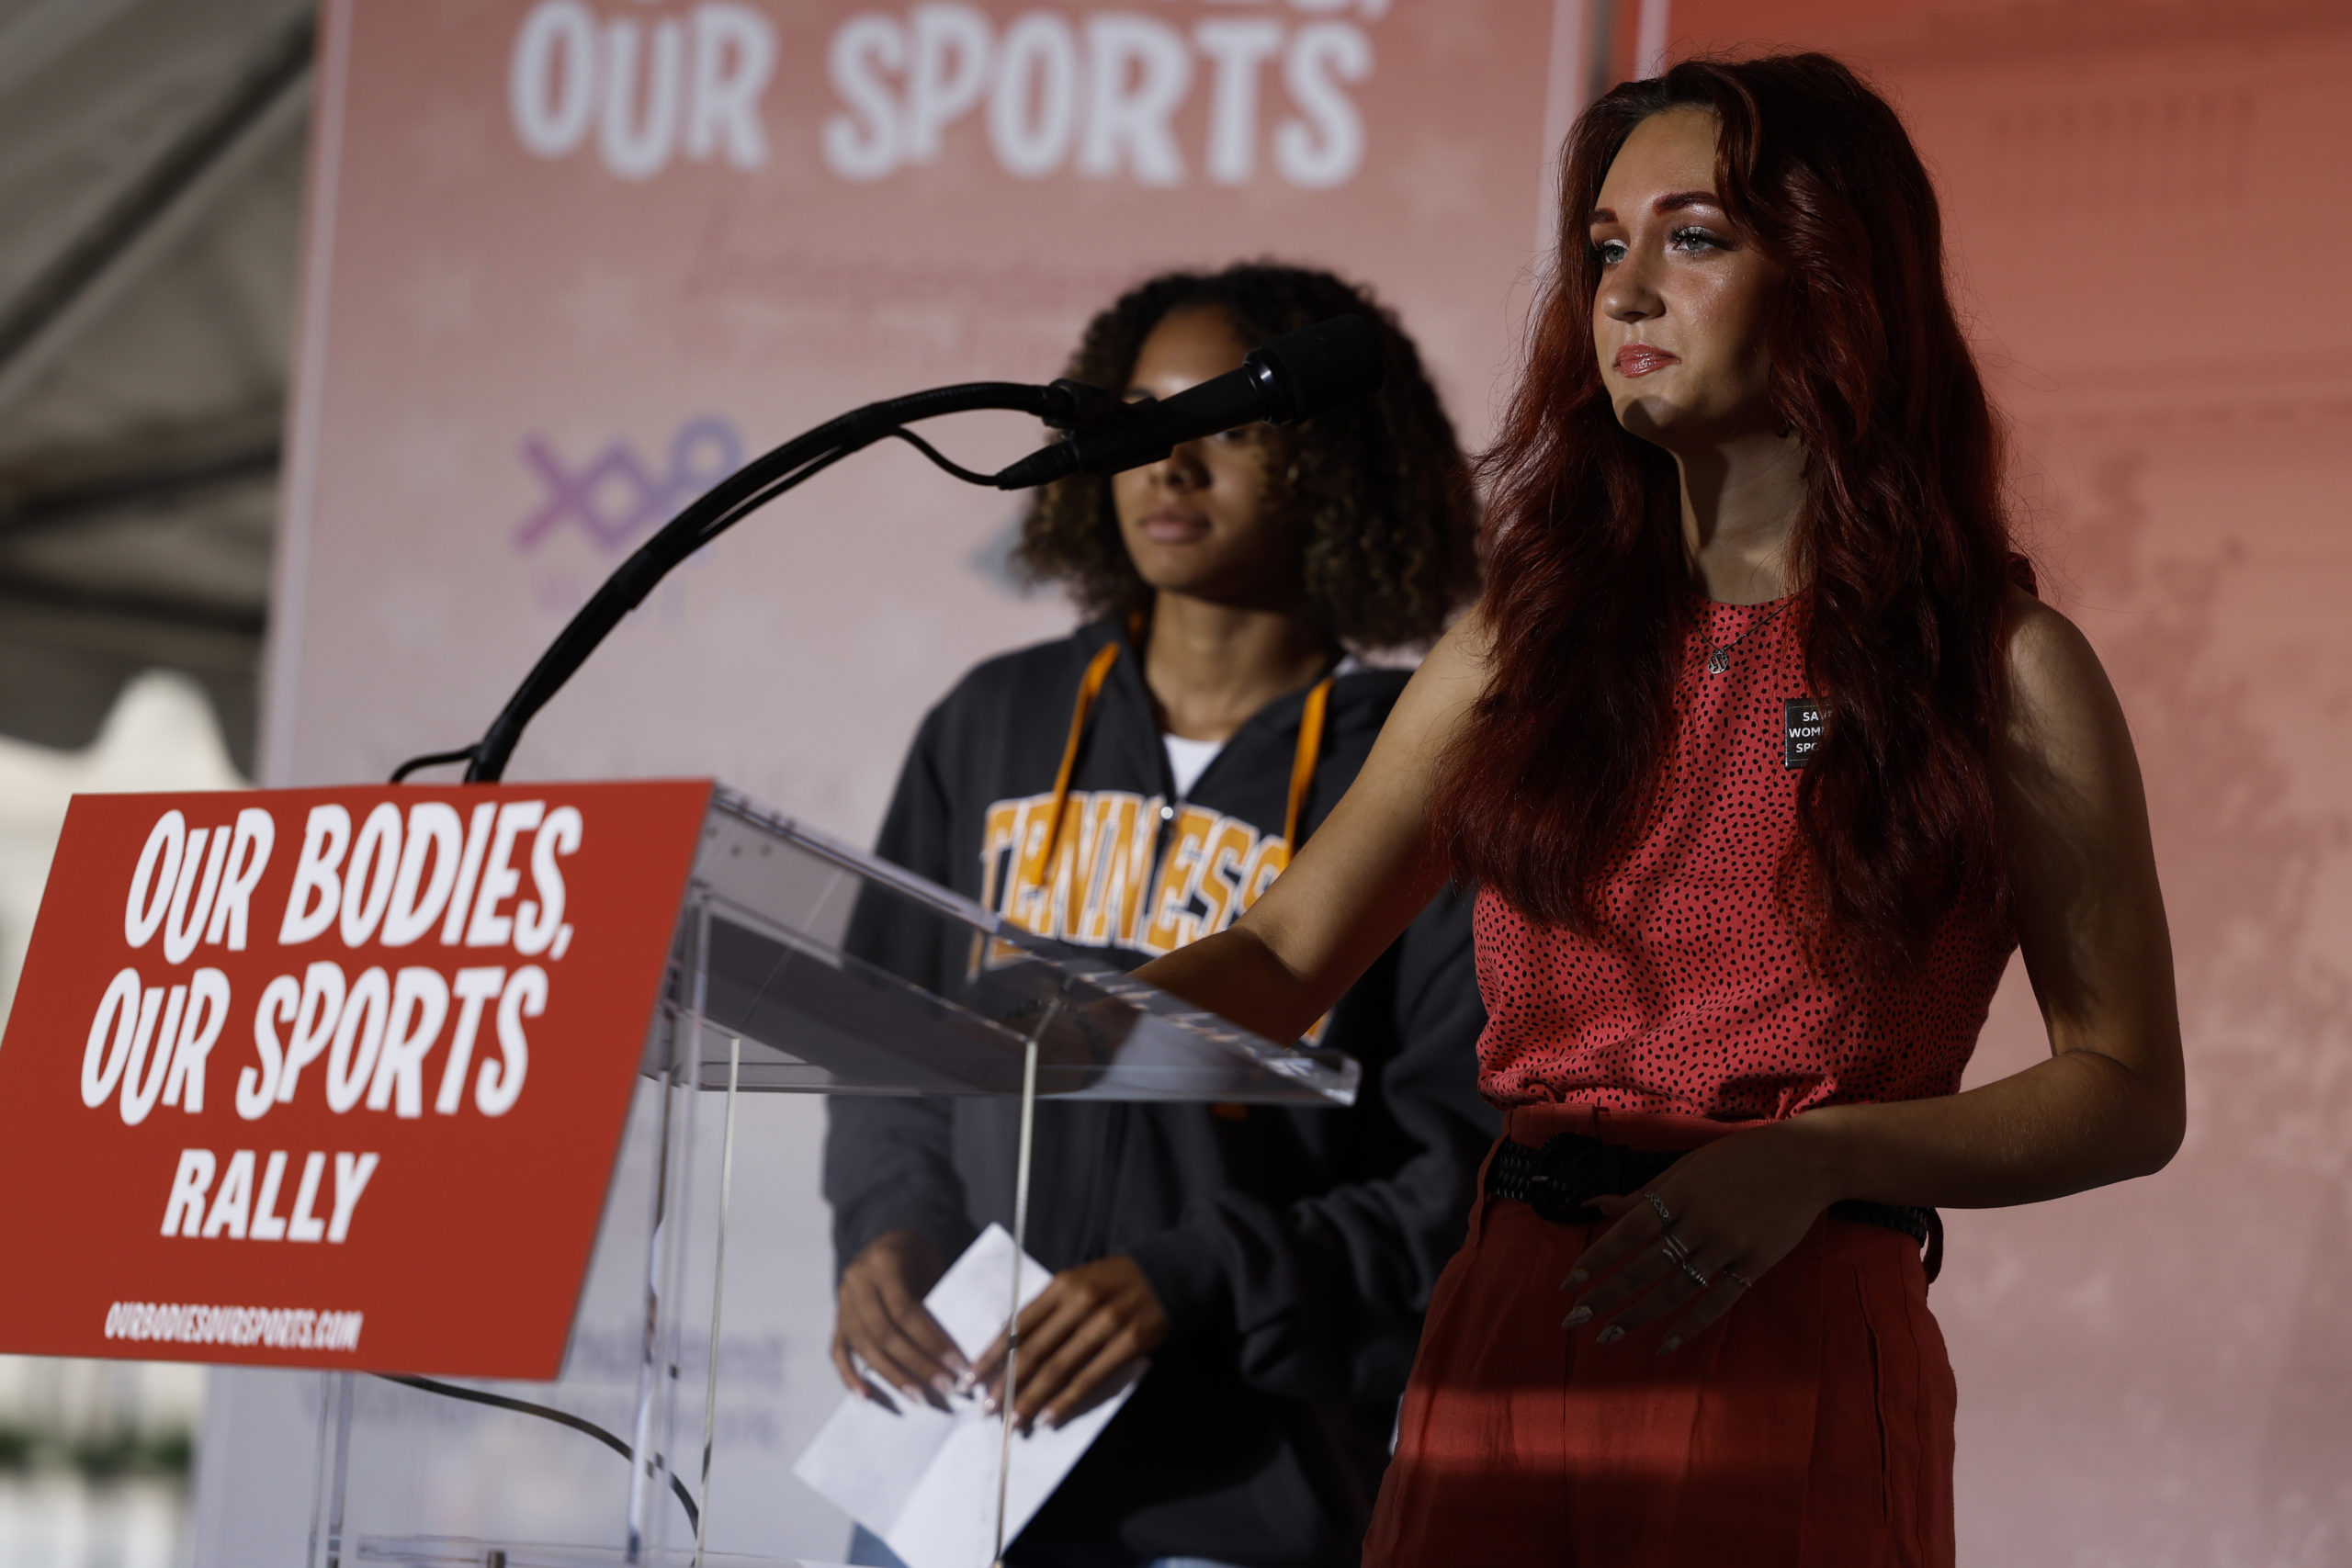 Selina Soule and Alanna Smith, two former Connecticut high school track athletes, speak during an "Our Bodies, Our Sports" rally for the 50th anniversary of Title IX at Freedom Plaza on June 23, 2022 in Washington, DC. The rally, organized by multiple athletic women's groups, was held to call on U.S. President Joe Biden to put restrictions on transgender females and "advocate to keep women's sports female". (Photo by Anna Moneymaker/Getty Images)